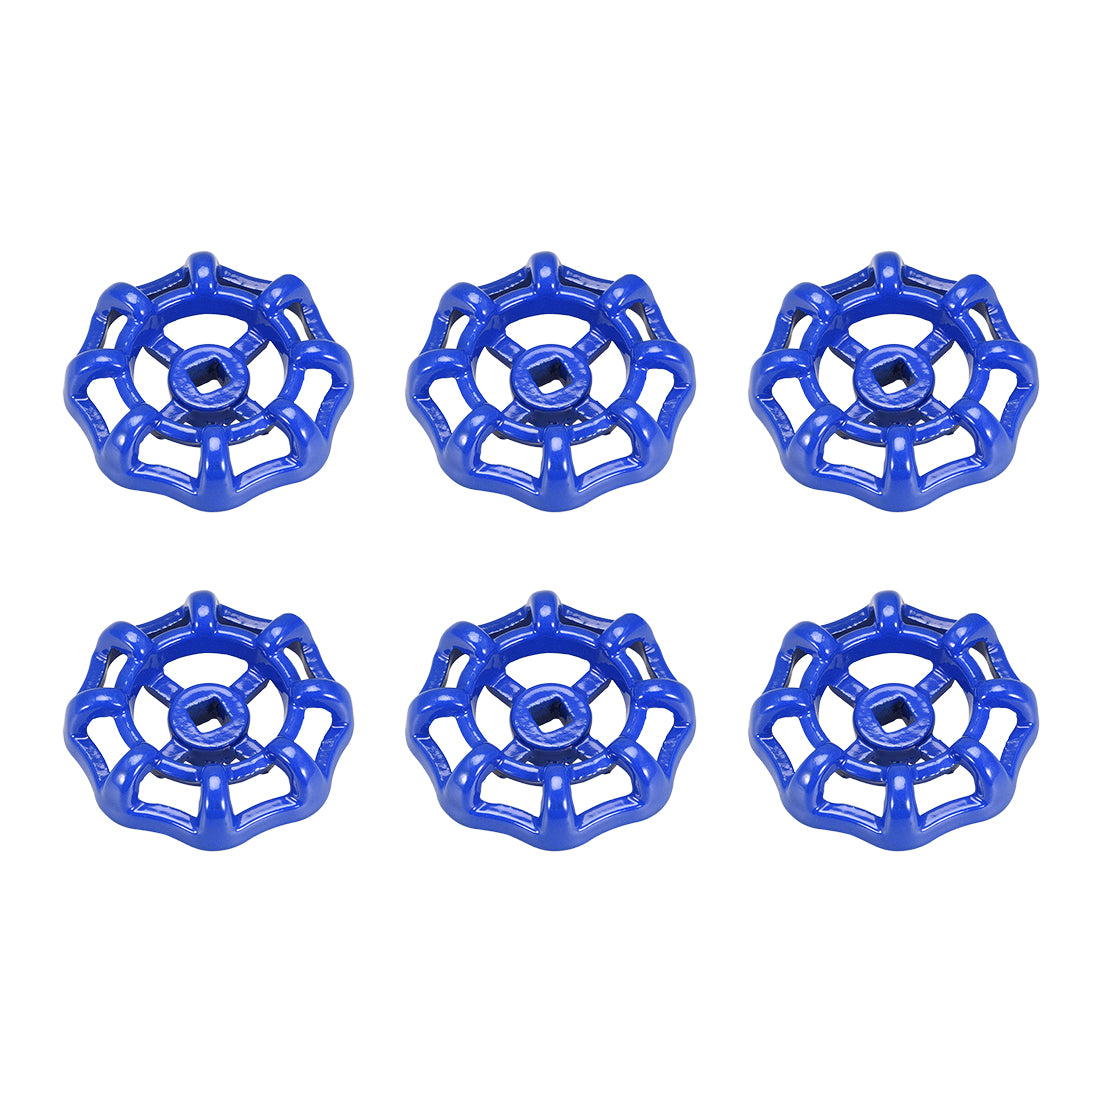 Uxcell Uxcell Round Wheel Handle Square Broach 6x6mm Wheel OD 58mm Paint Cast Steel Blue 6Pcs